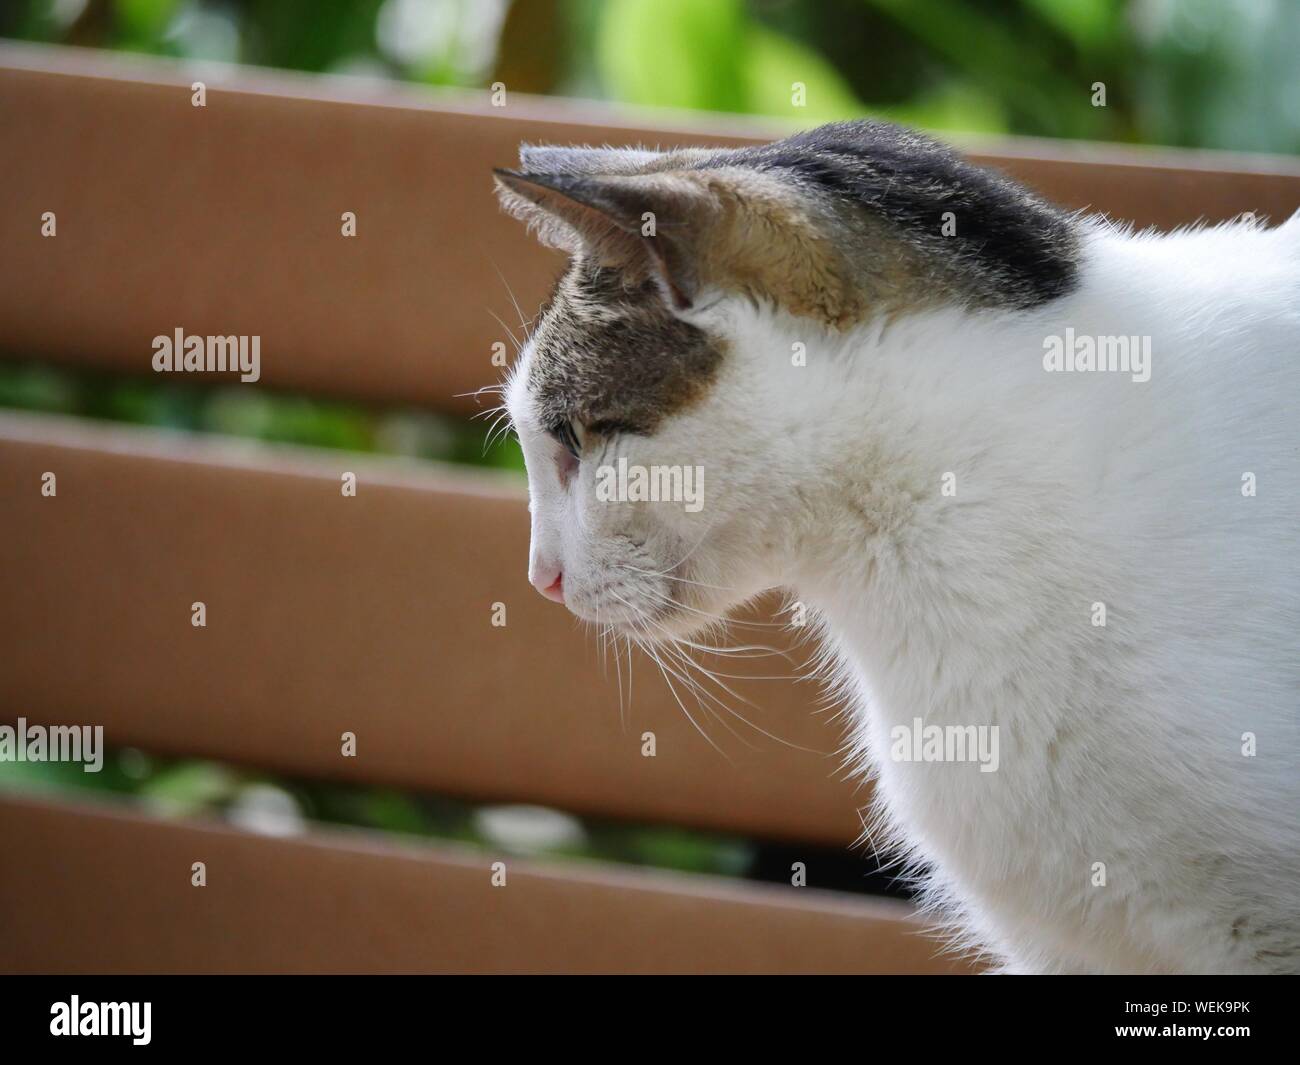 Side view of a cat standing up on a wooden bench at the Hemingway house in Key West, Florida. Stock Photo